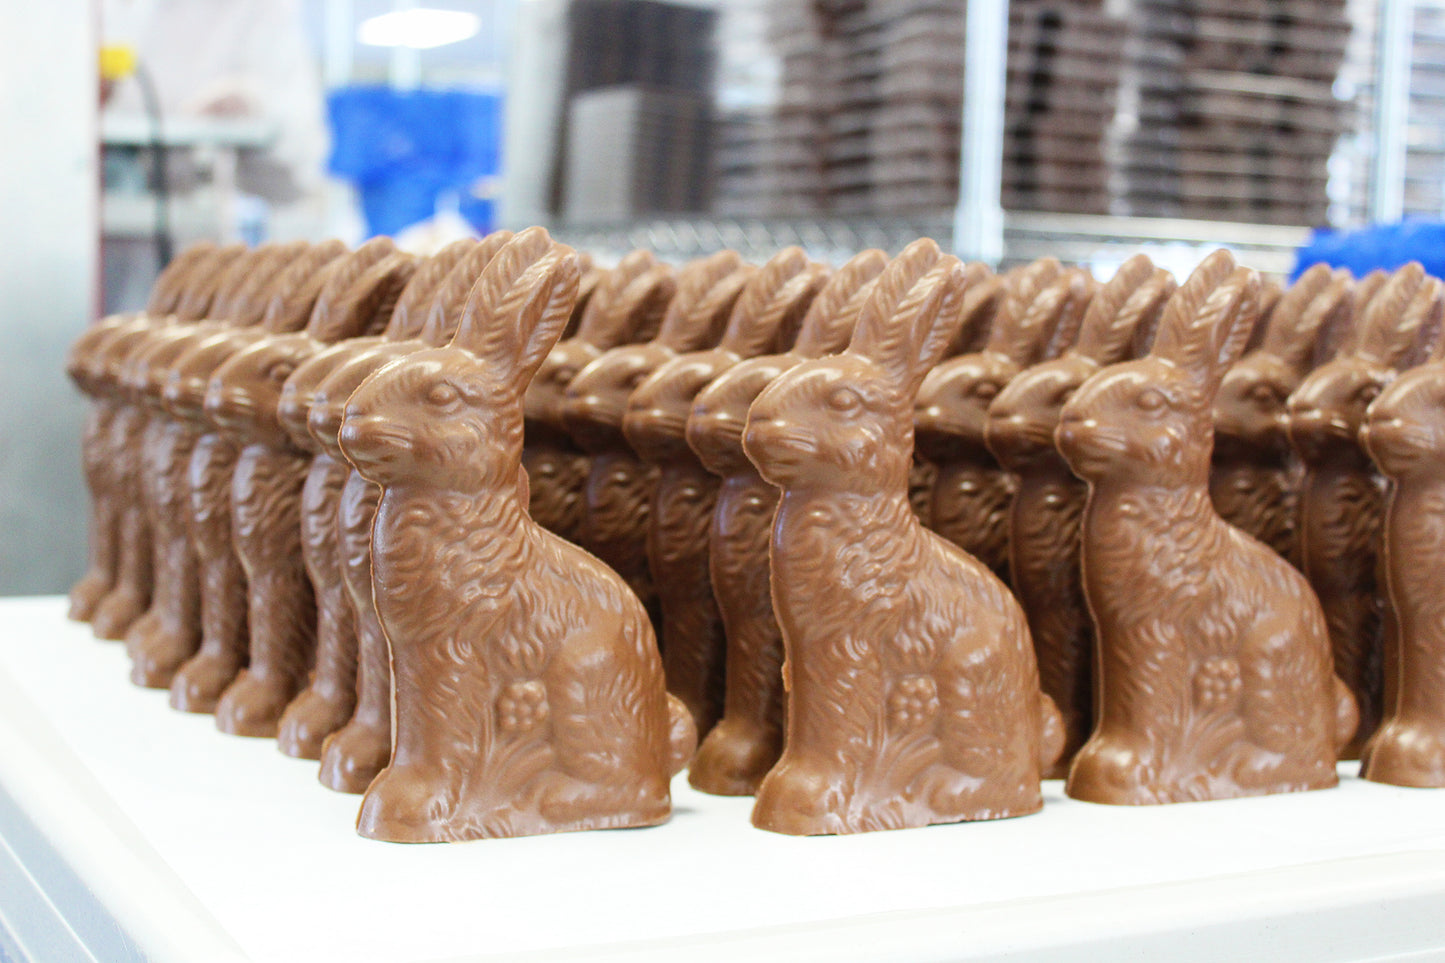 A lineup of milk chocolate bunnies in a commercial kitchen 